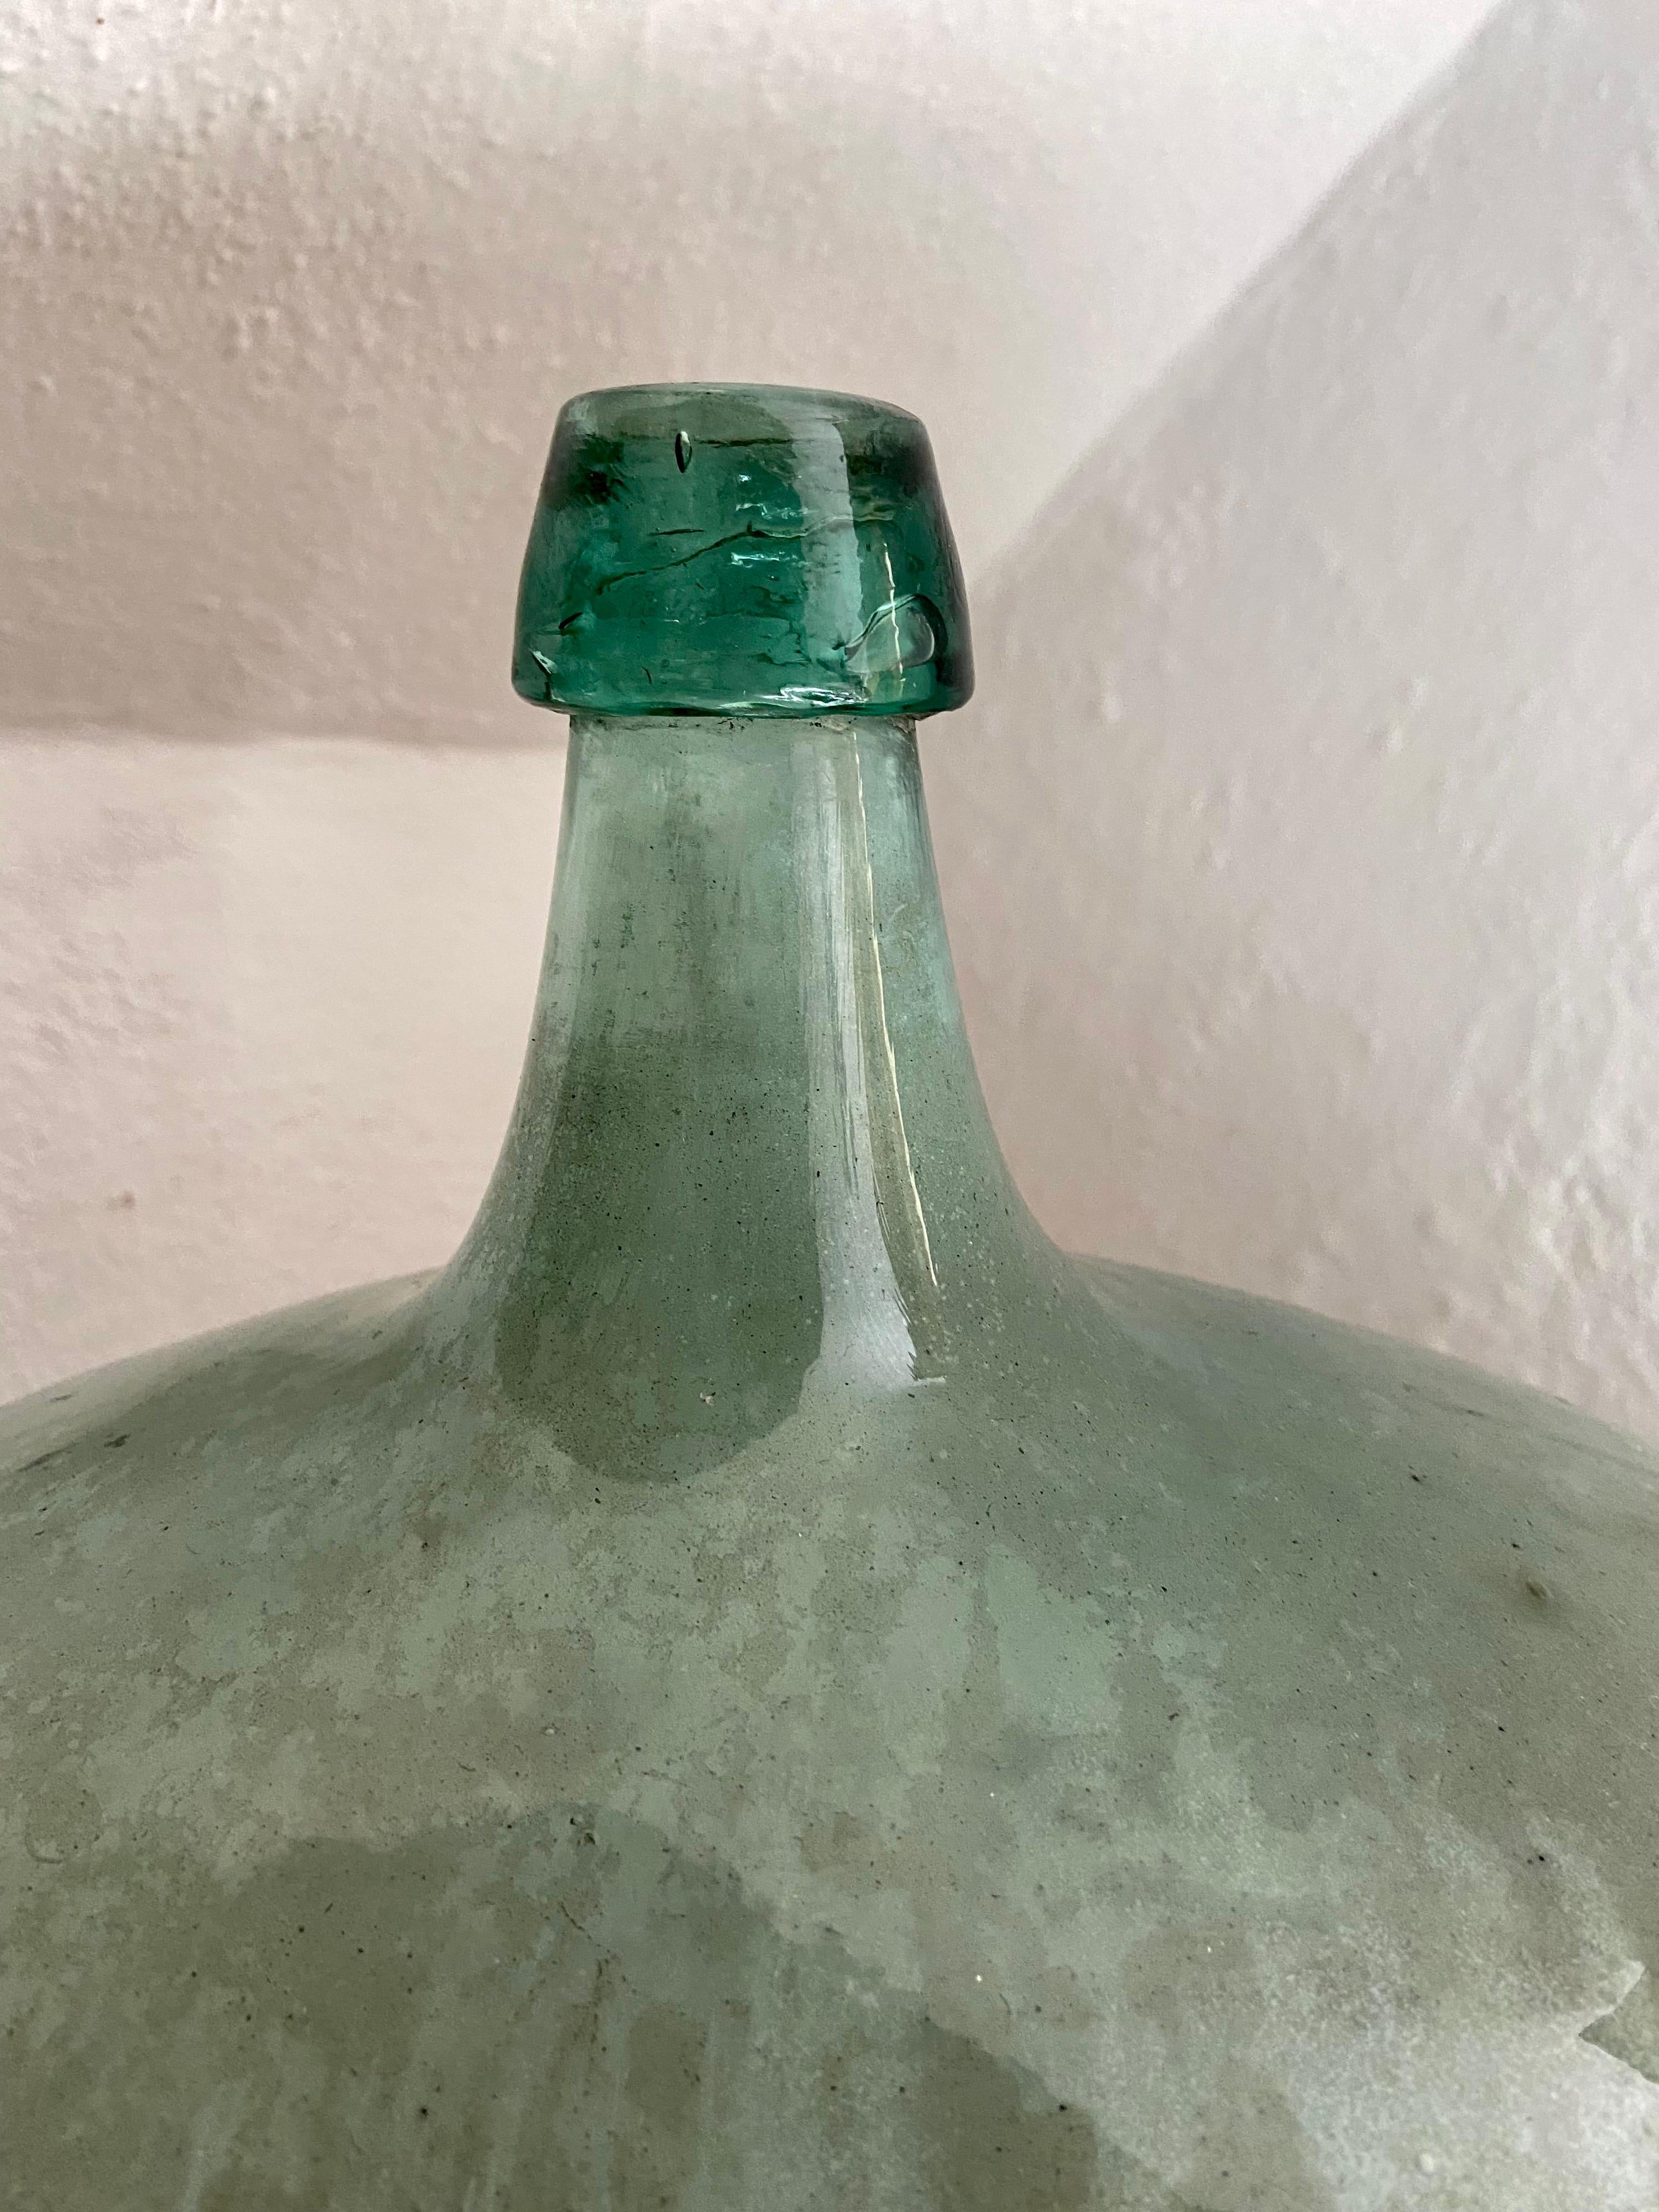 Hand-blown glass demijohn from Puebla, Mexico. These bottles were typically crafted in the early part of the 20th century. Light turquoise green and white coloration. Originally used to transport local wine.